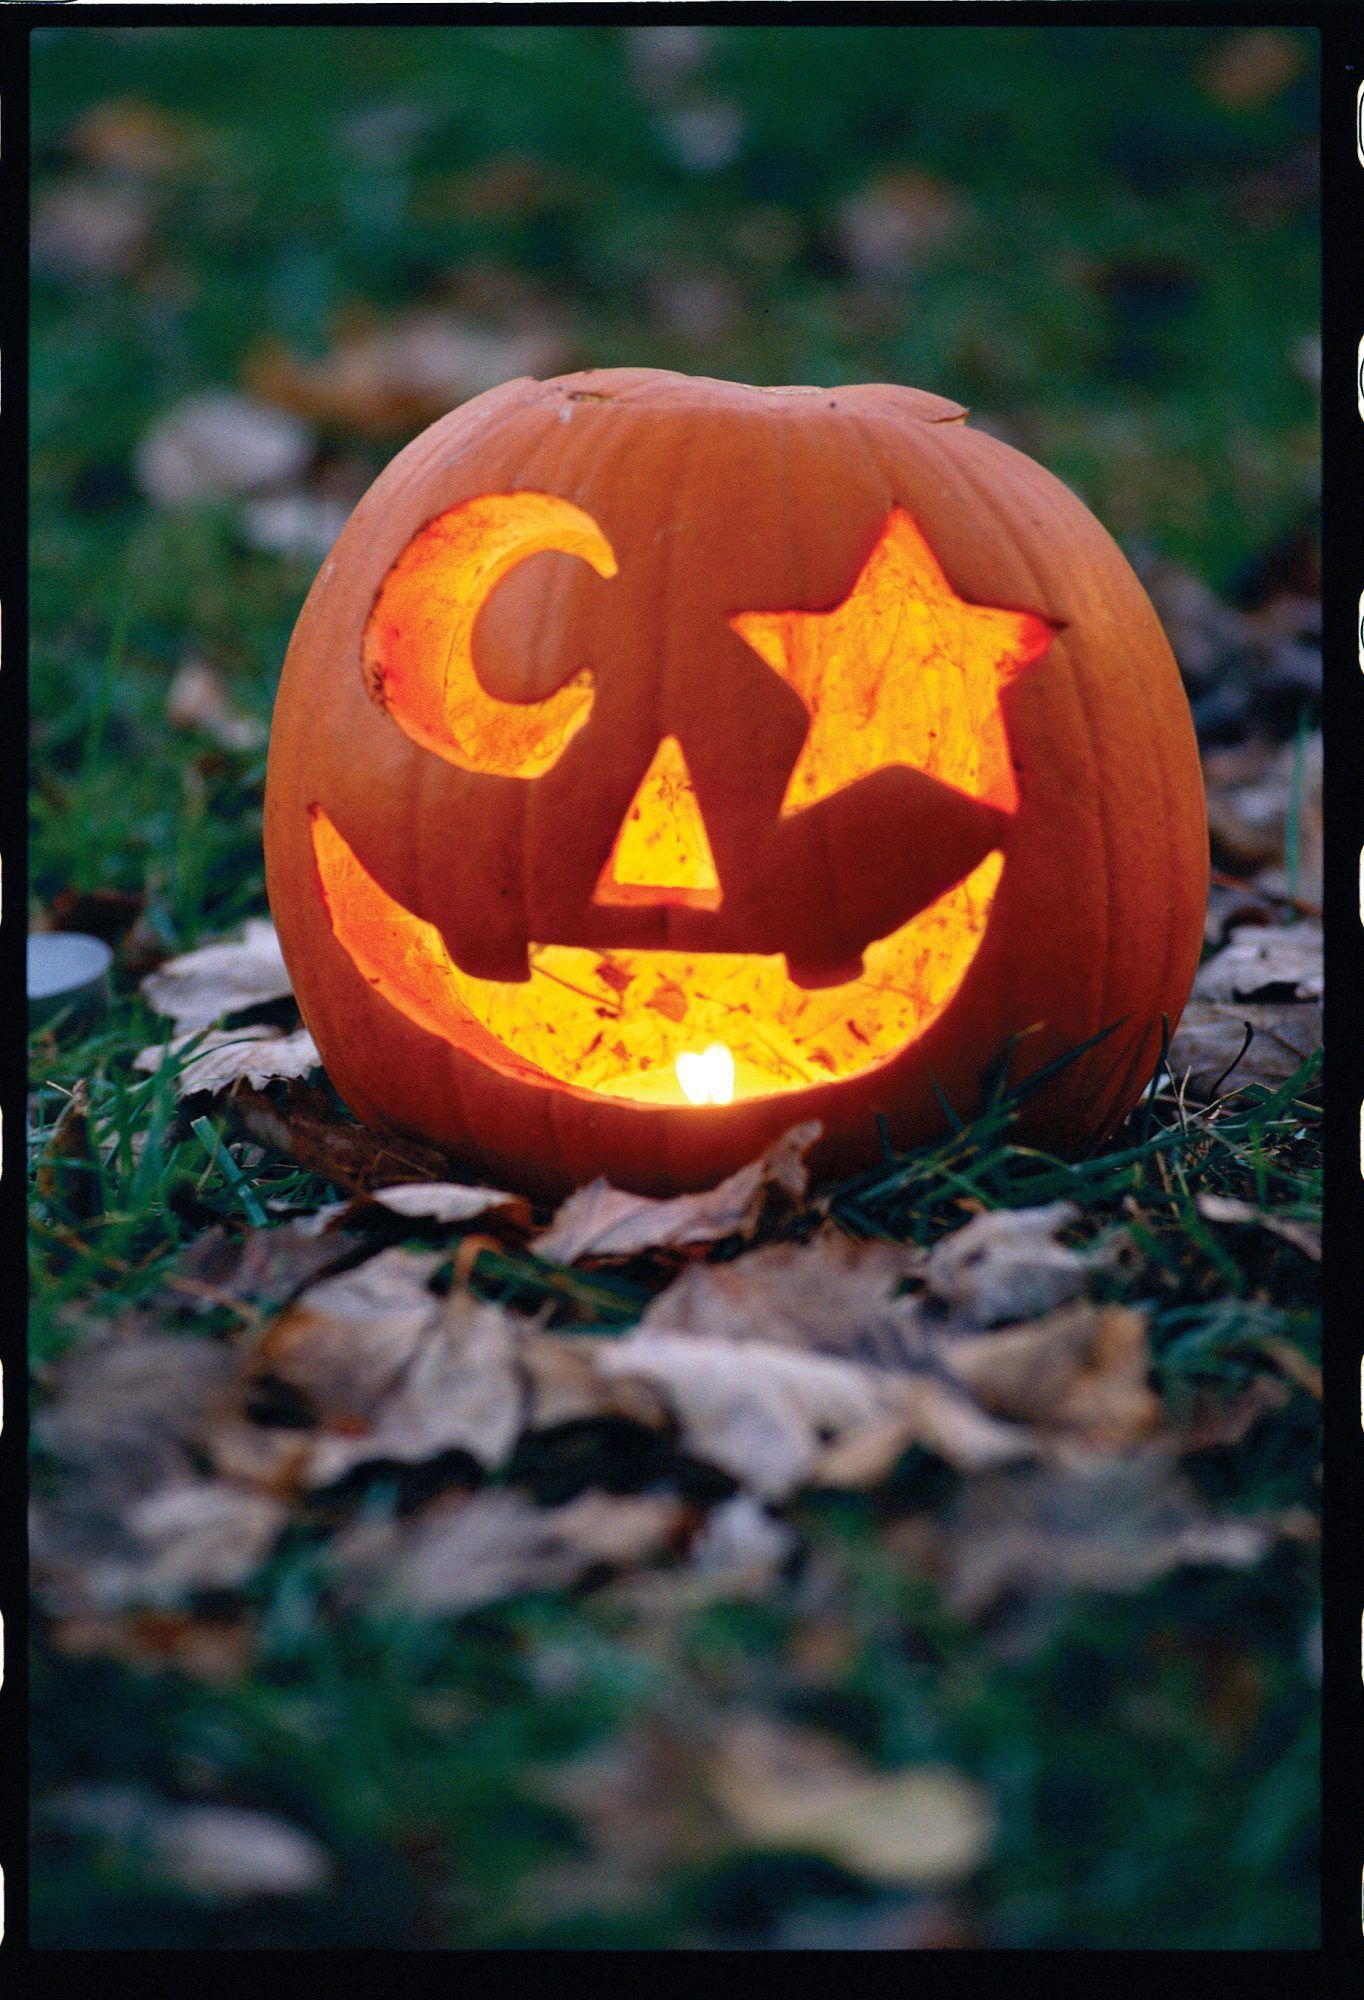 33 Pumpkin Carving Ideas -   17 creative and easy for pumkin carving ideas